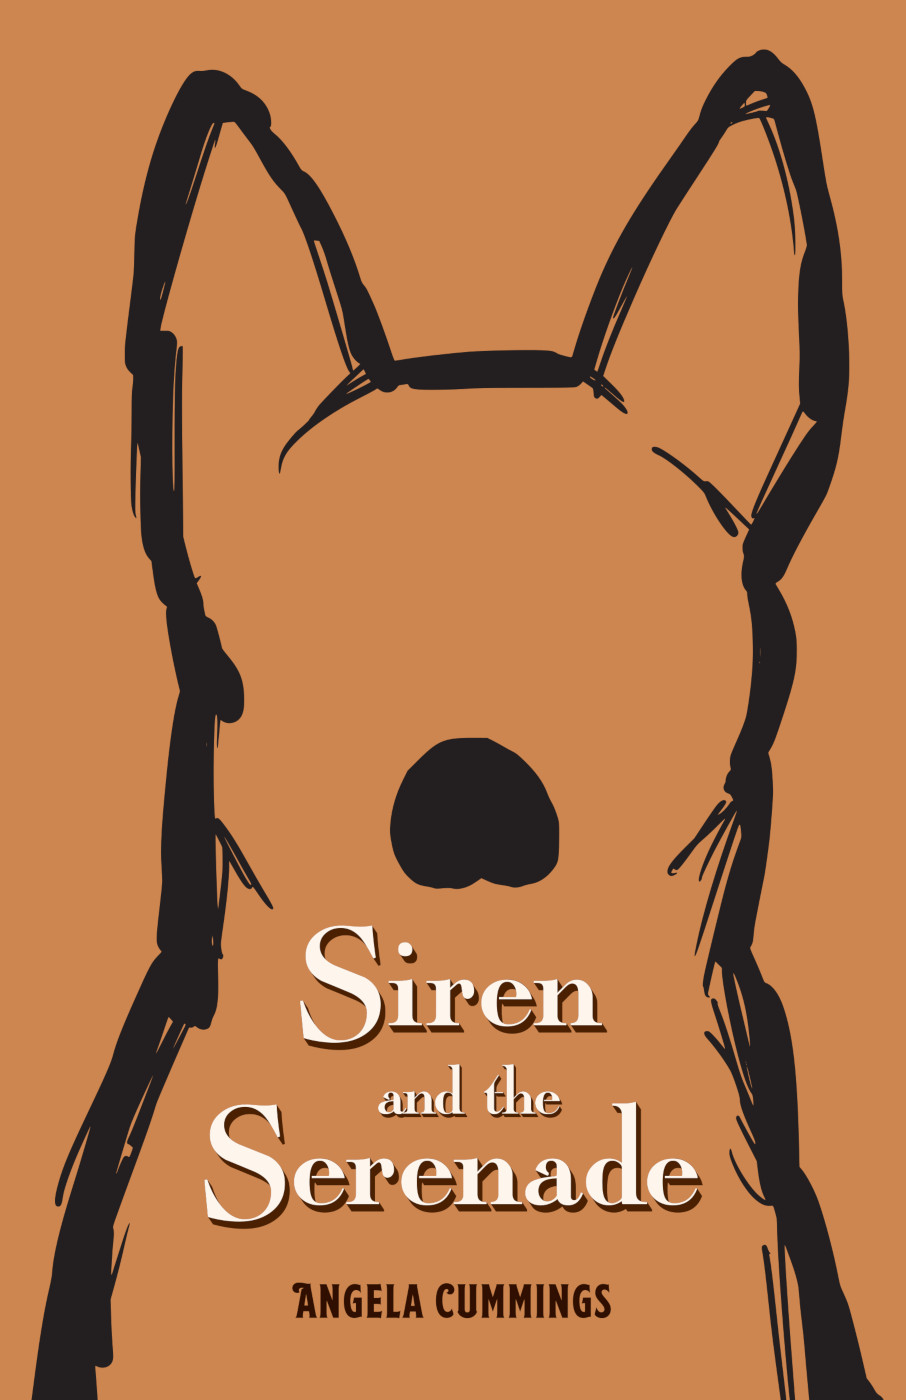 Siren and the Serenade book cover